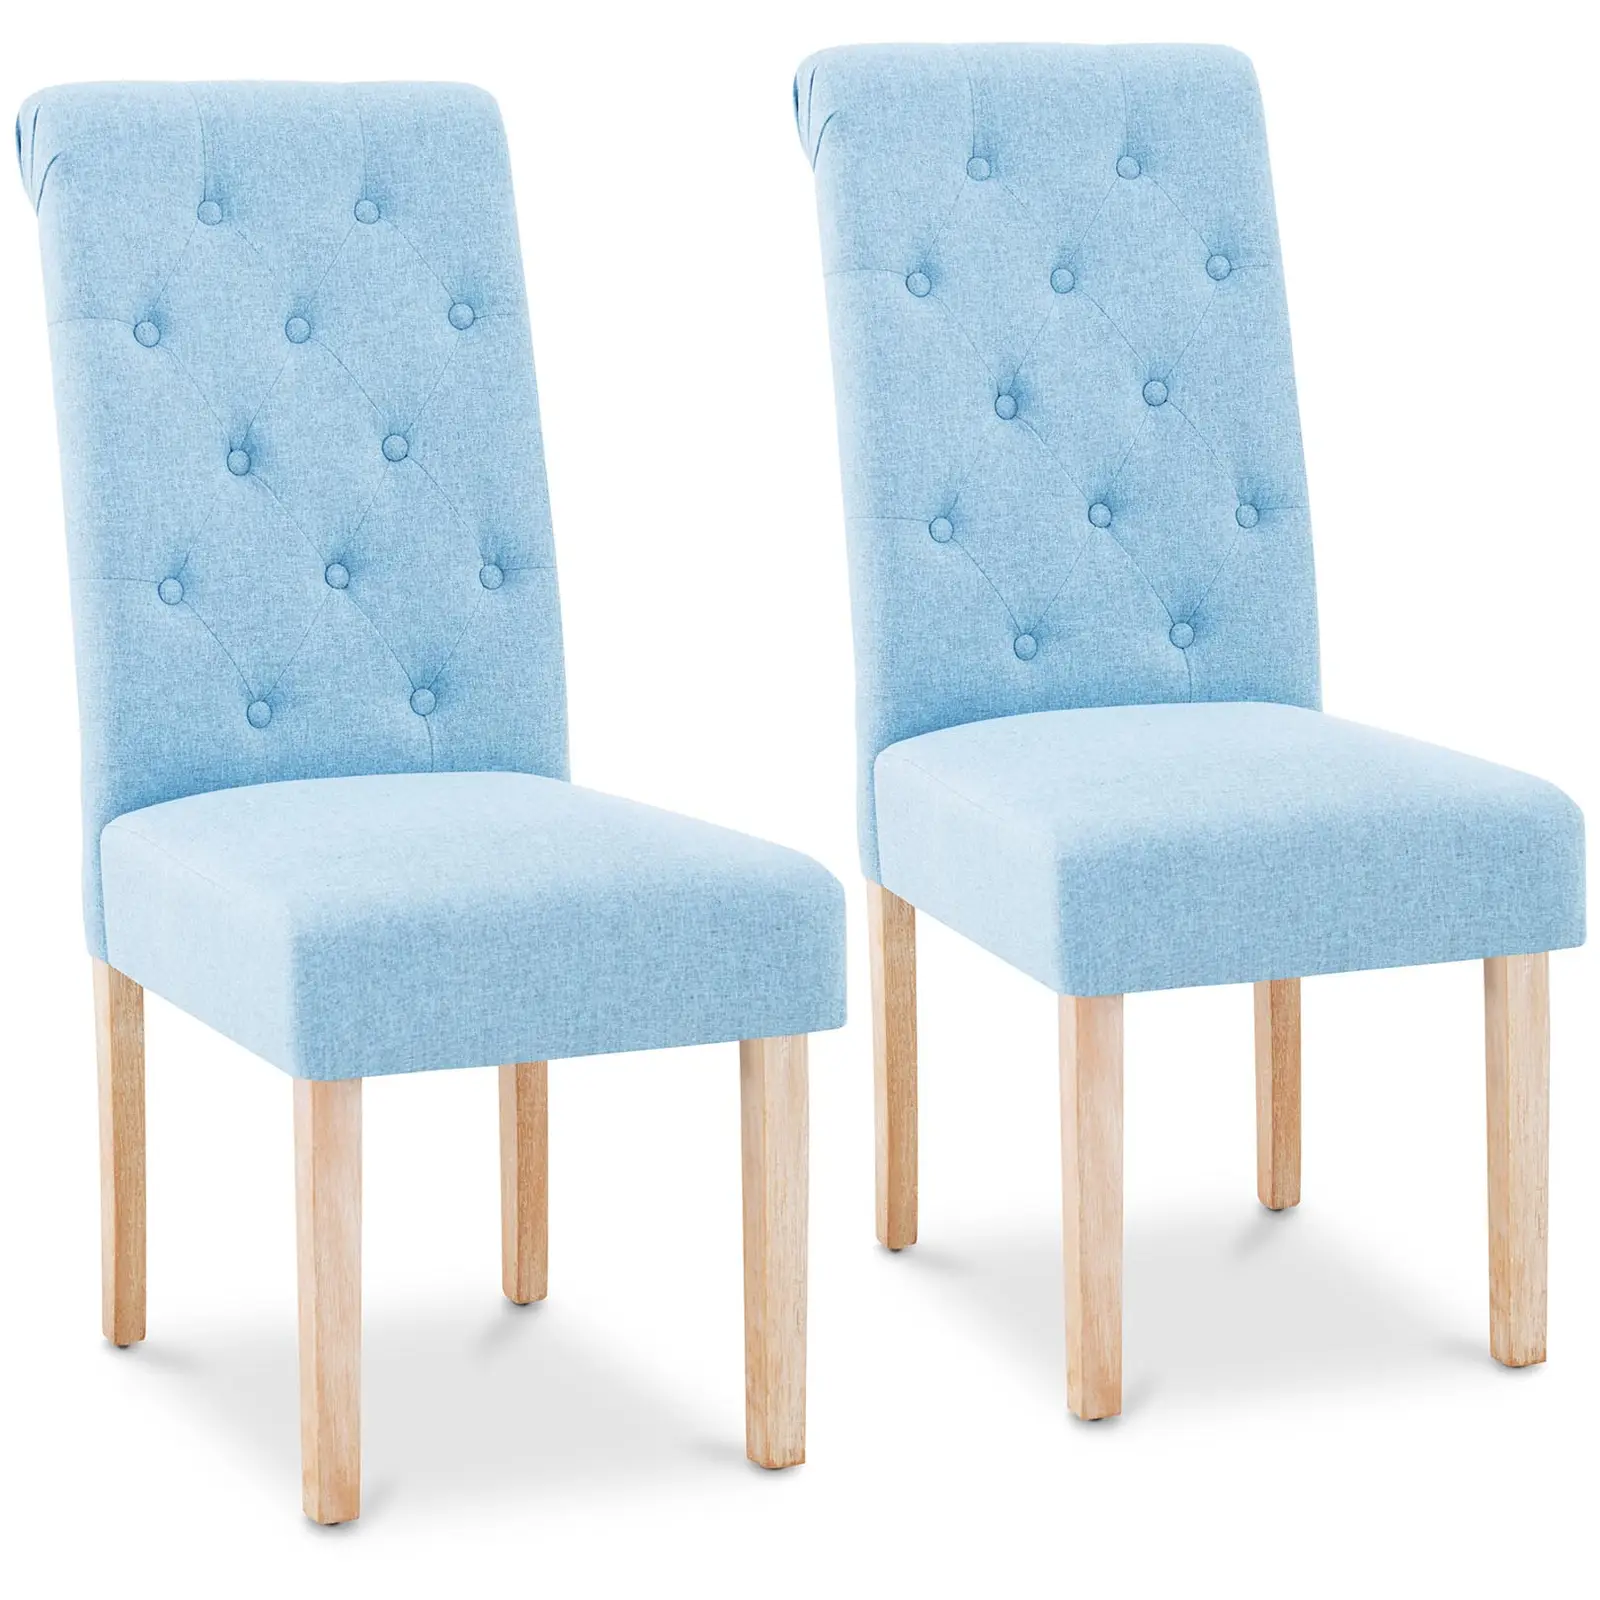 Upholstered Chair - set of 2 - up to 180 kg - seat 46 x 42 cm - sky blue